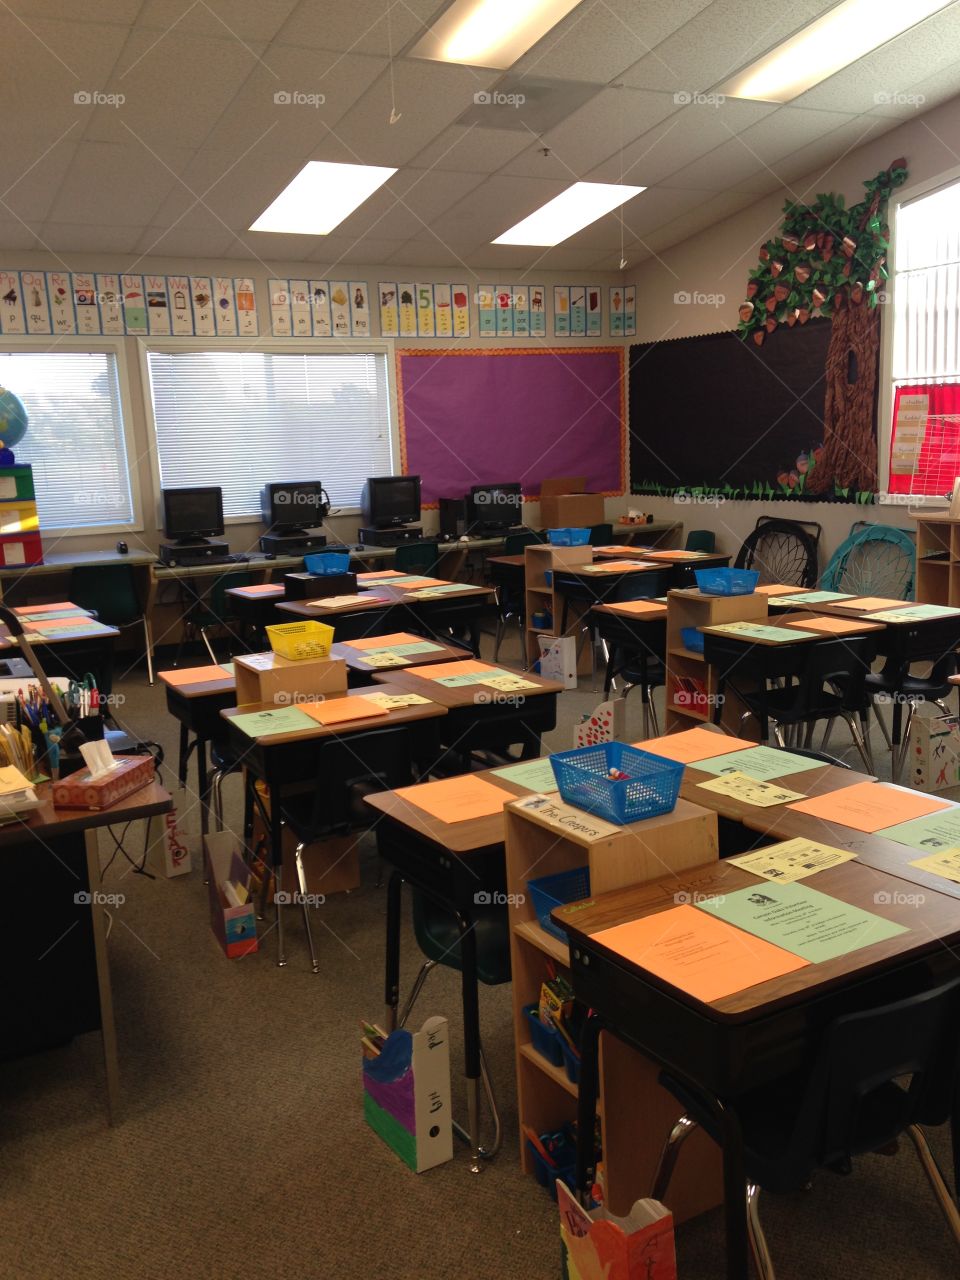 My mom's classroom at Canyon Oaks Elementary School on the annual Back to School Night circa 2014.